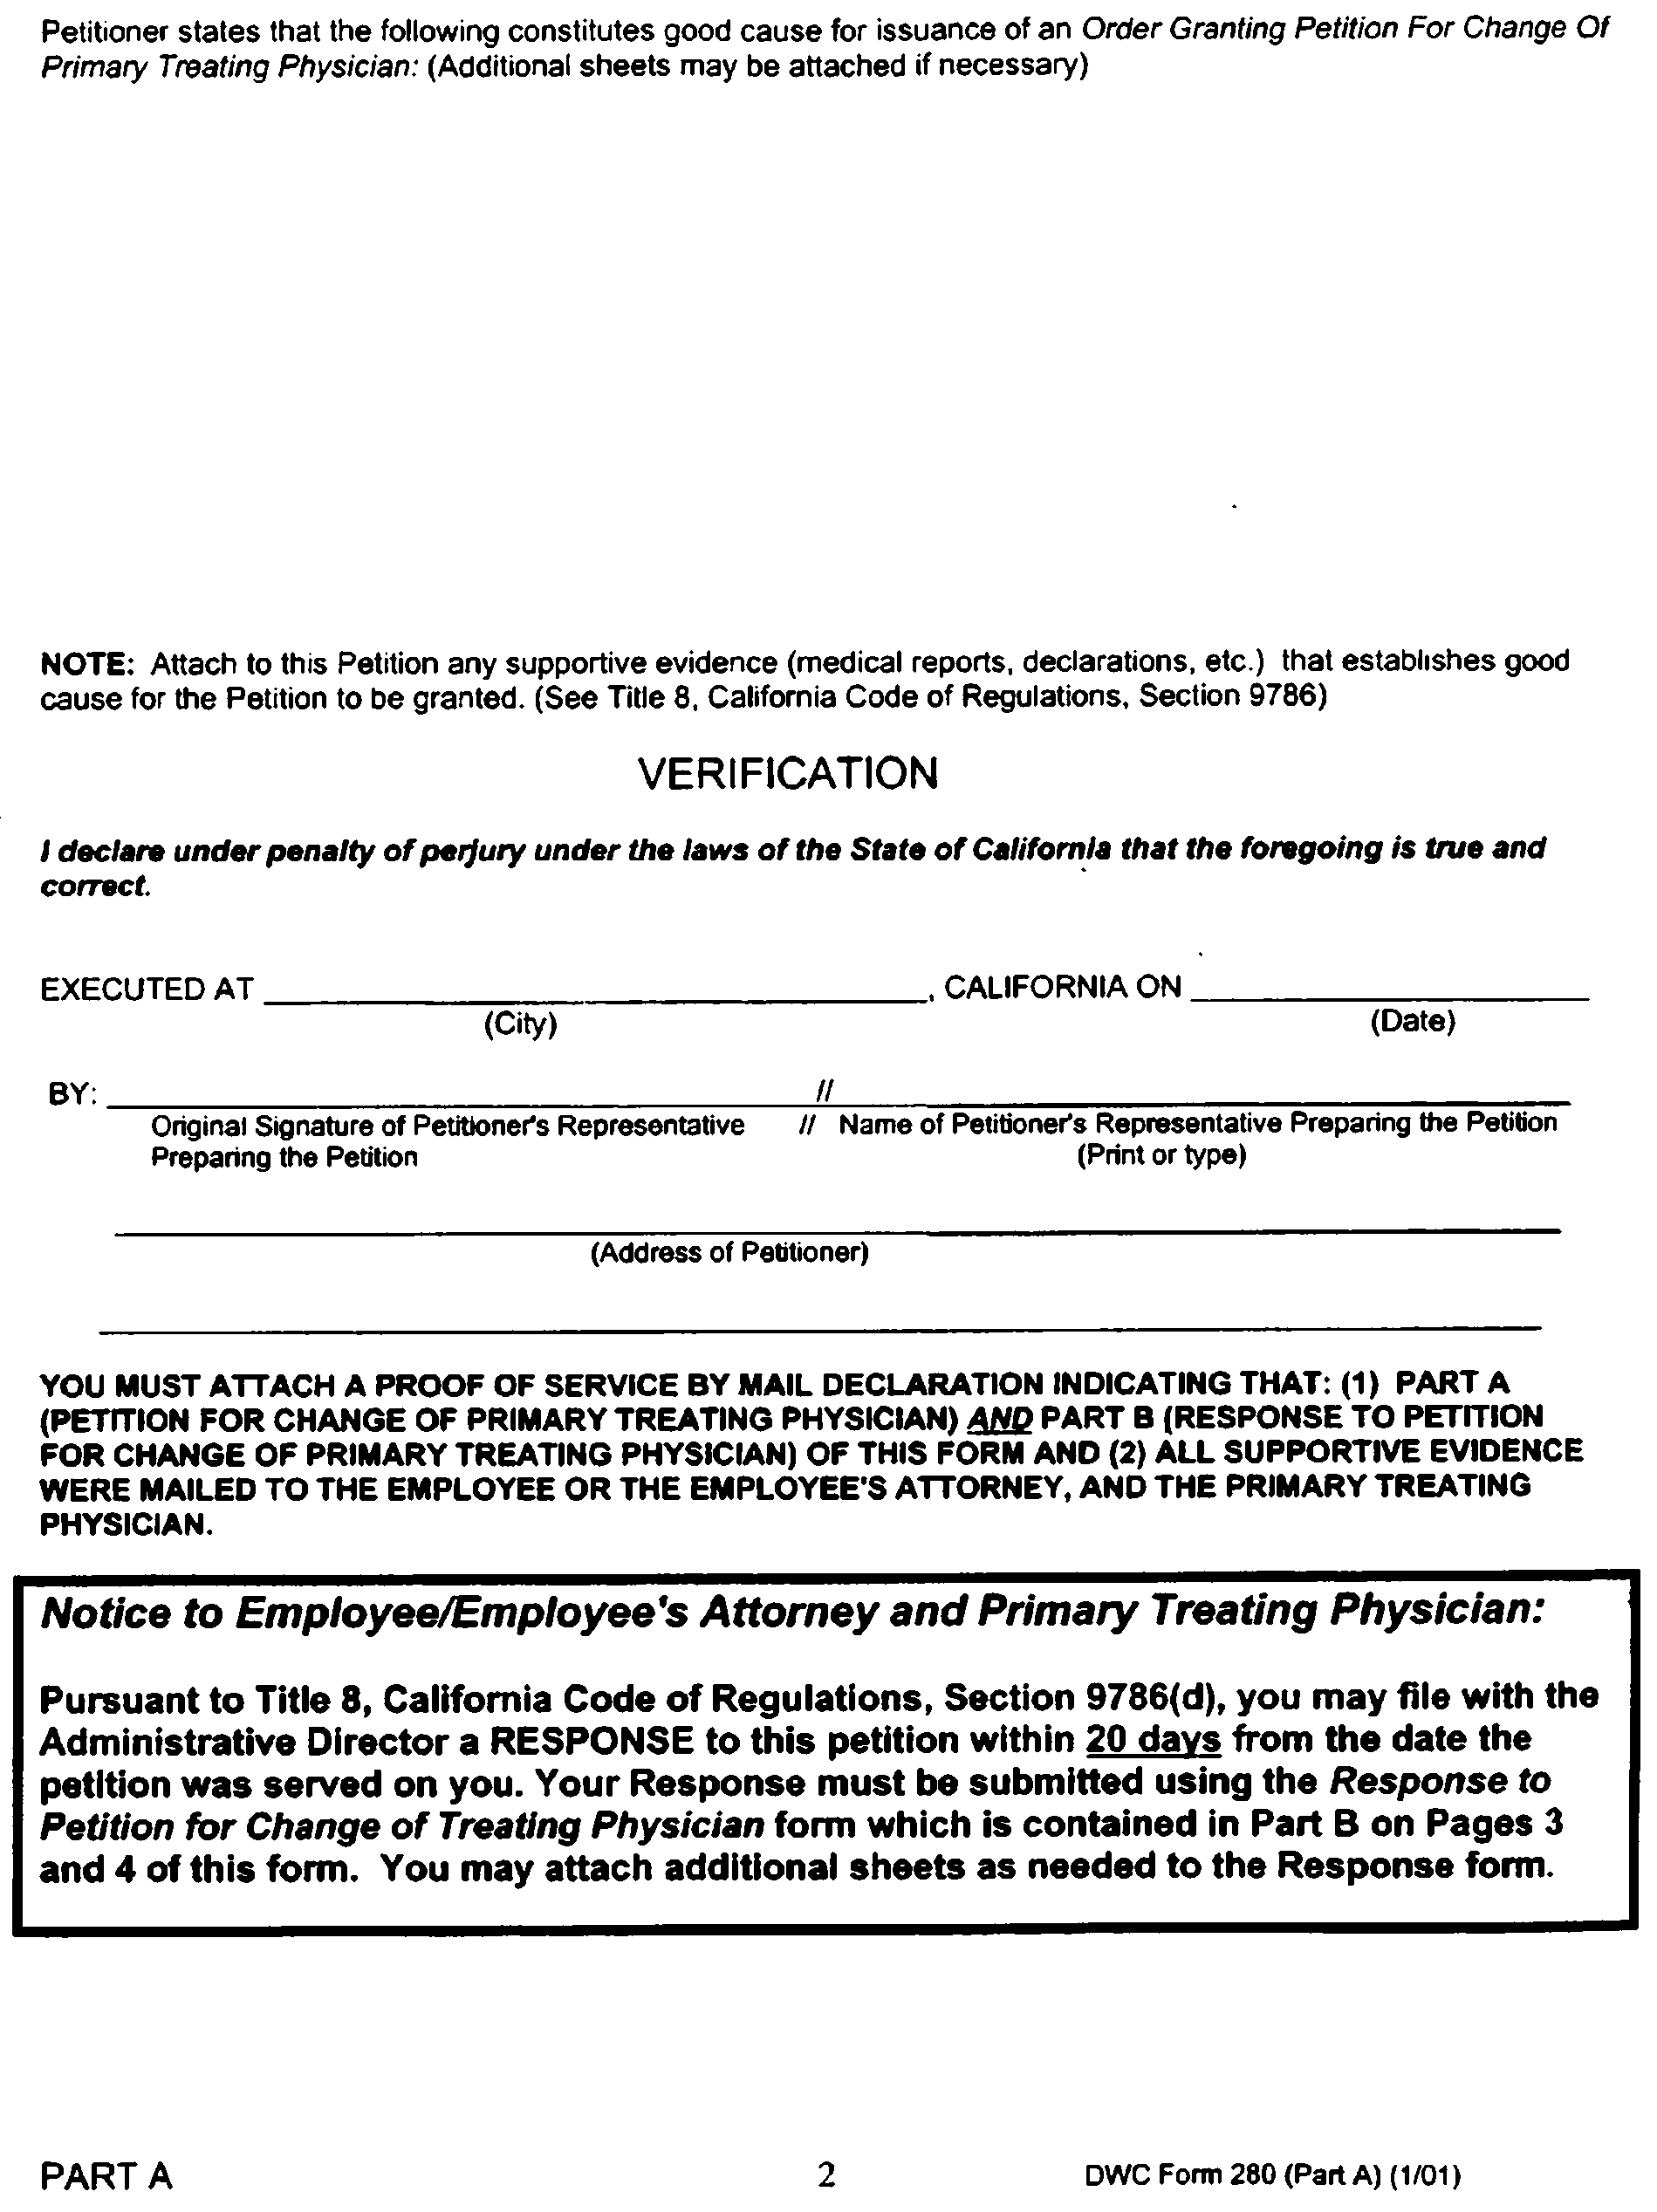 Image 2 within § 9786.1. Petition for Change of Primary Treating Physician; Response to Petition for Change of Primary Treating Physician (DWC Form 280 (Parts A and B)).